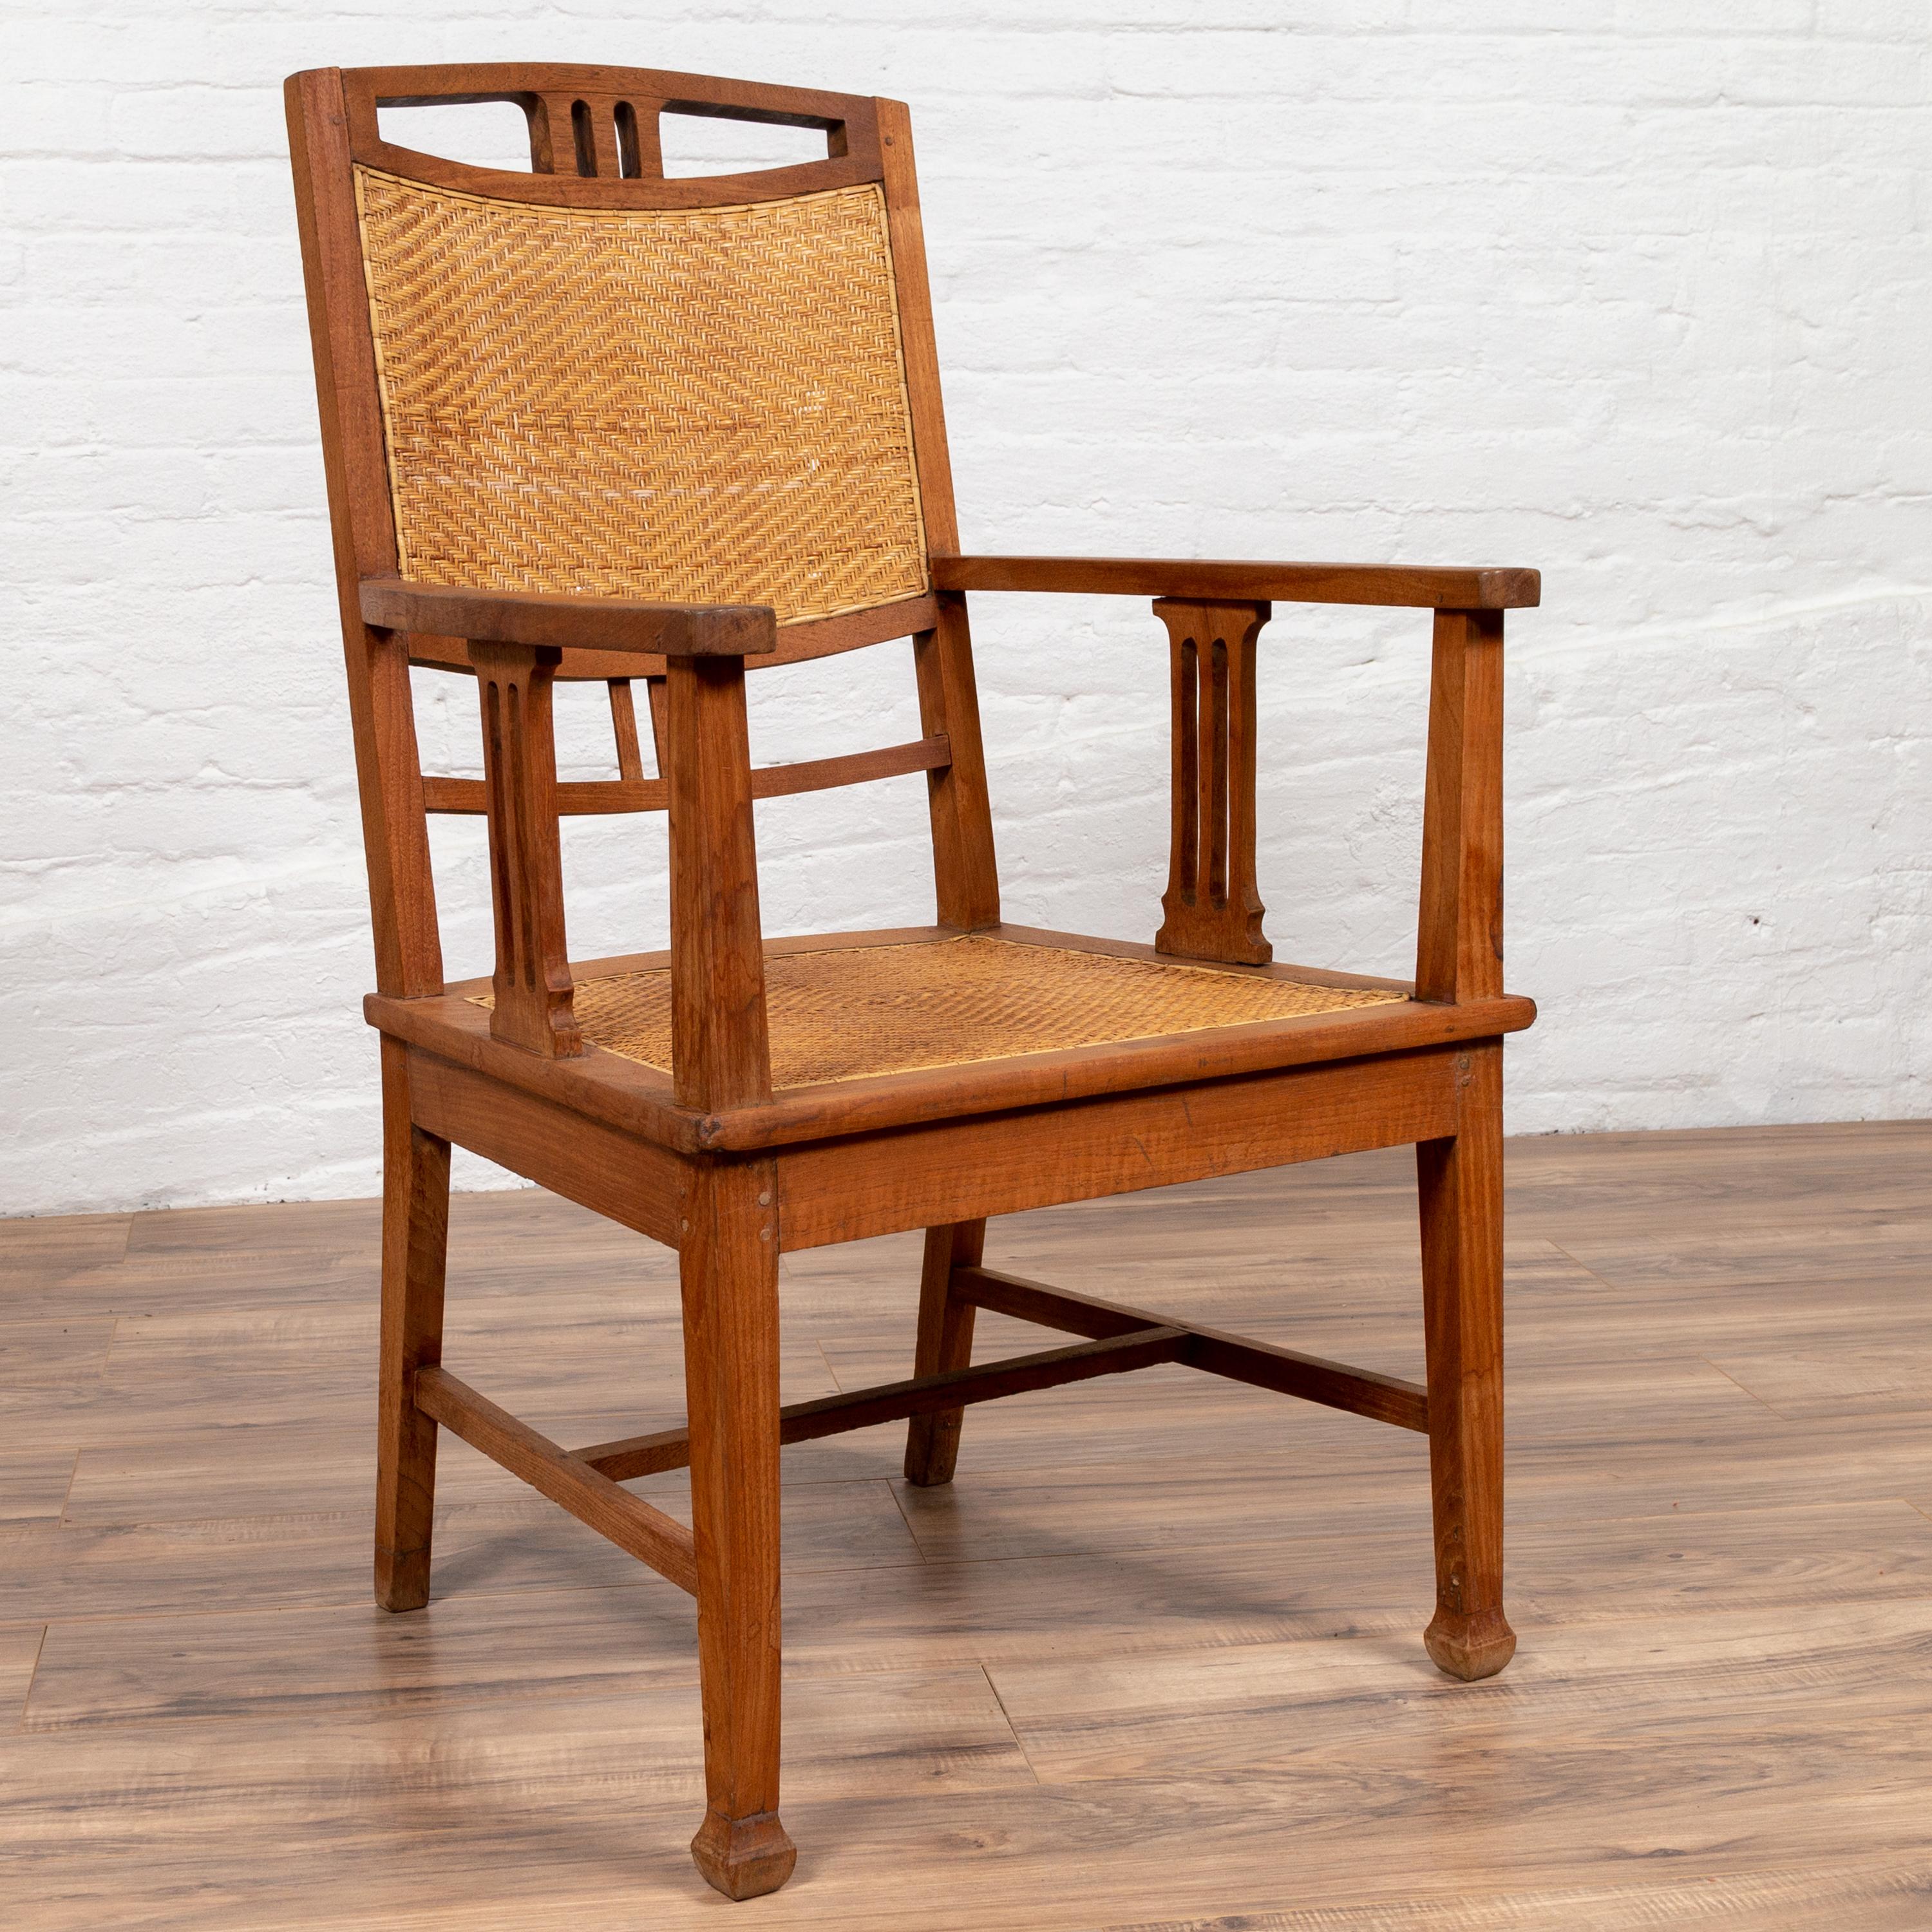 20th Century Dutch Colonial Javanese Teak Armchair with Rattan and Triglyph Inspired Motifs For Sale